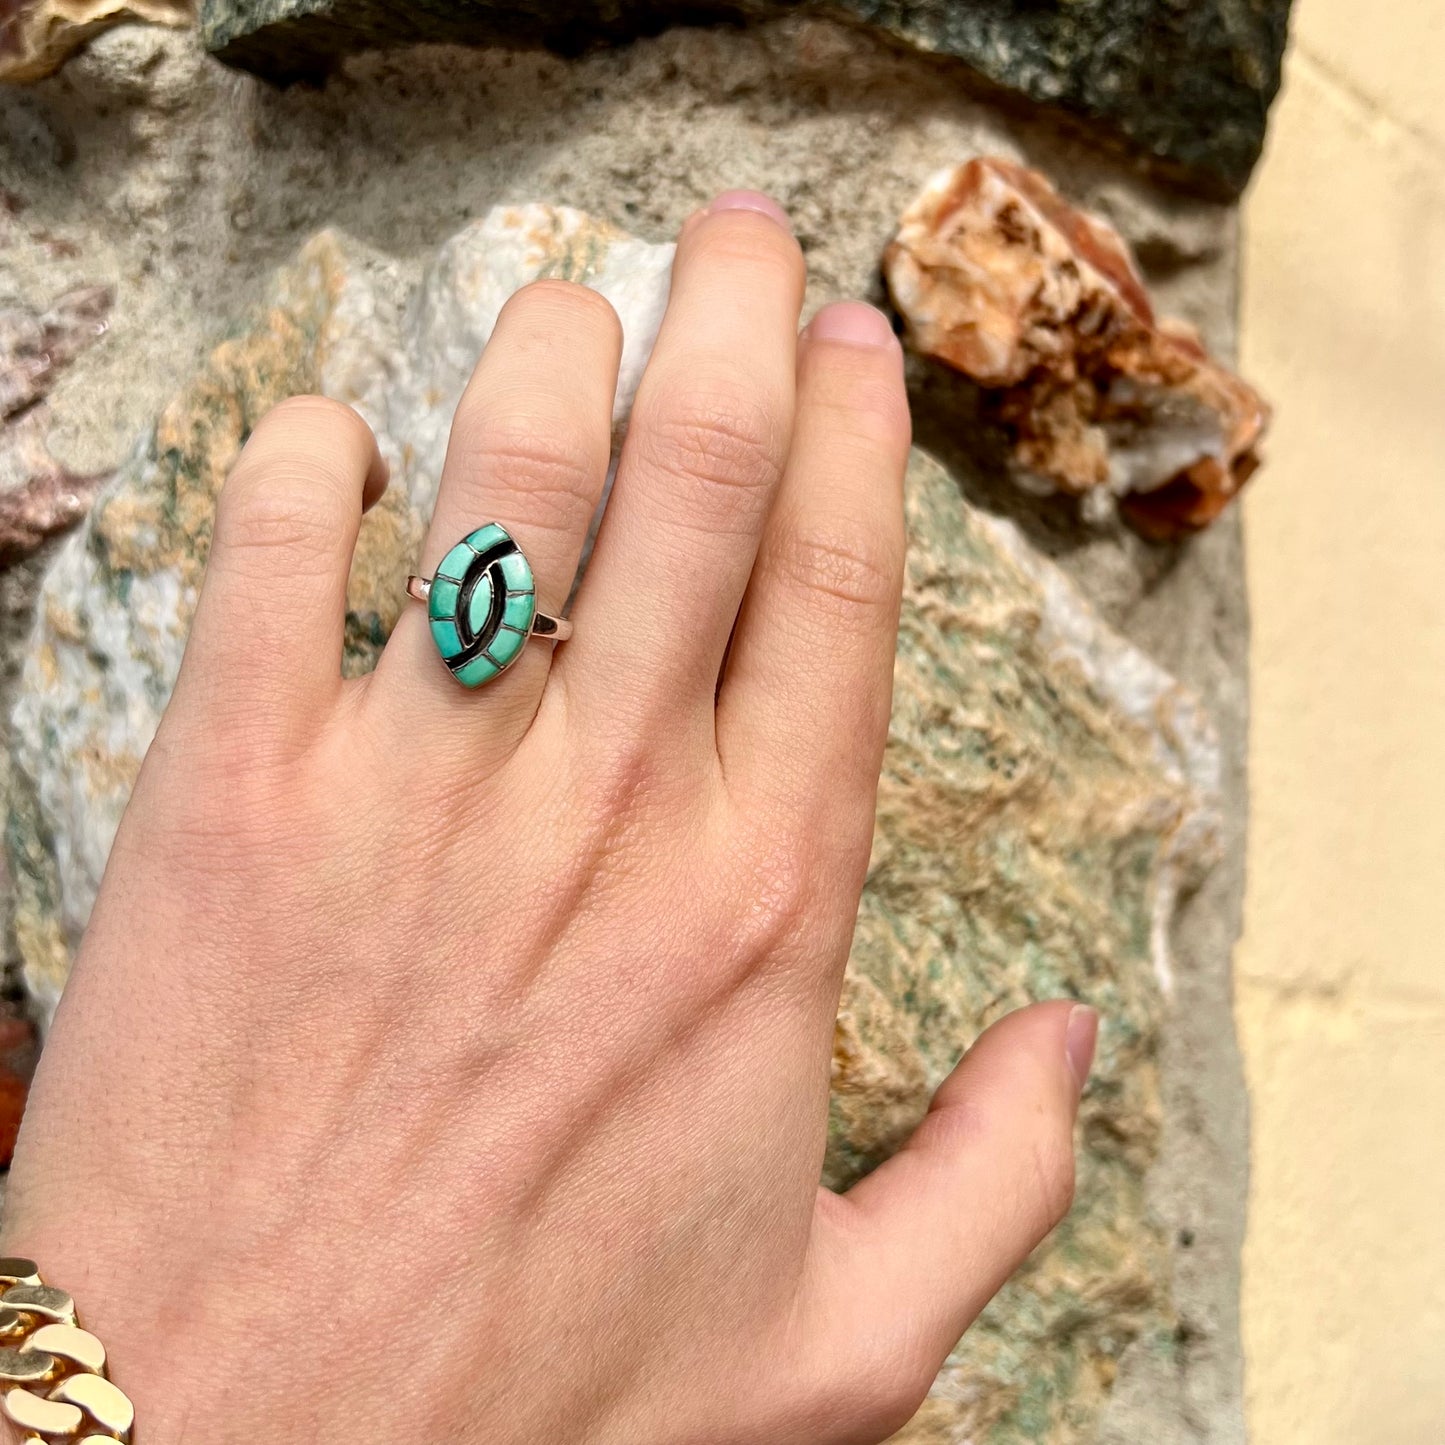 Vintage sterling silver Zuni Indian ring inlay set with green turquoise stones in the motif of a hummingbird.